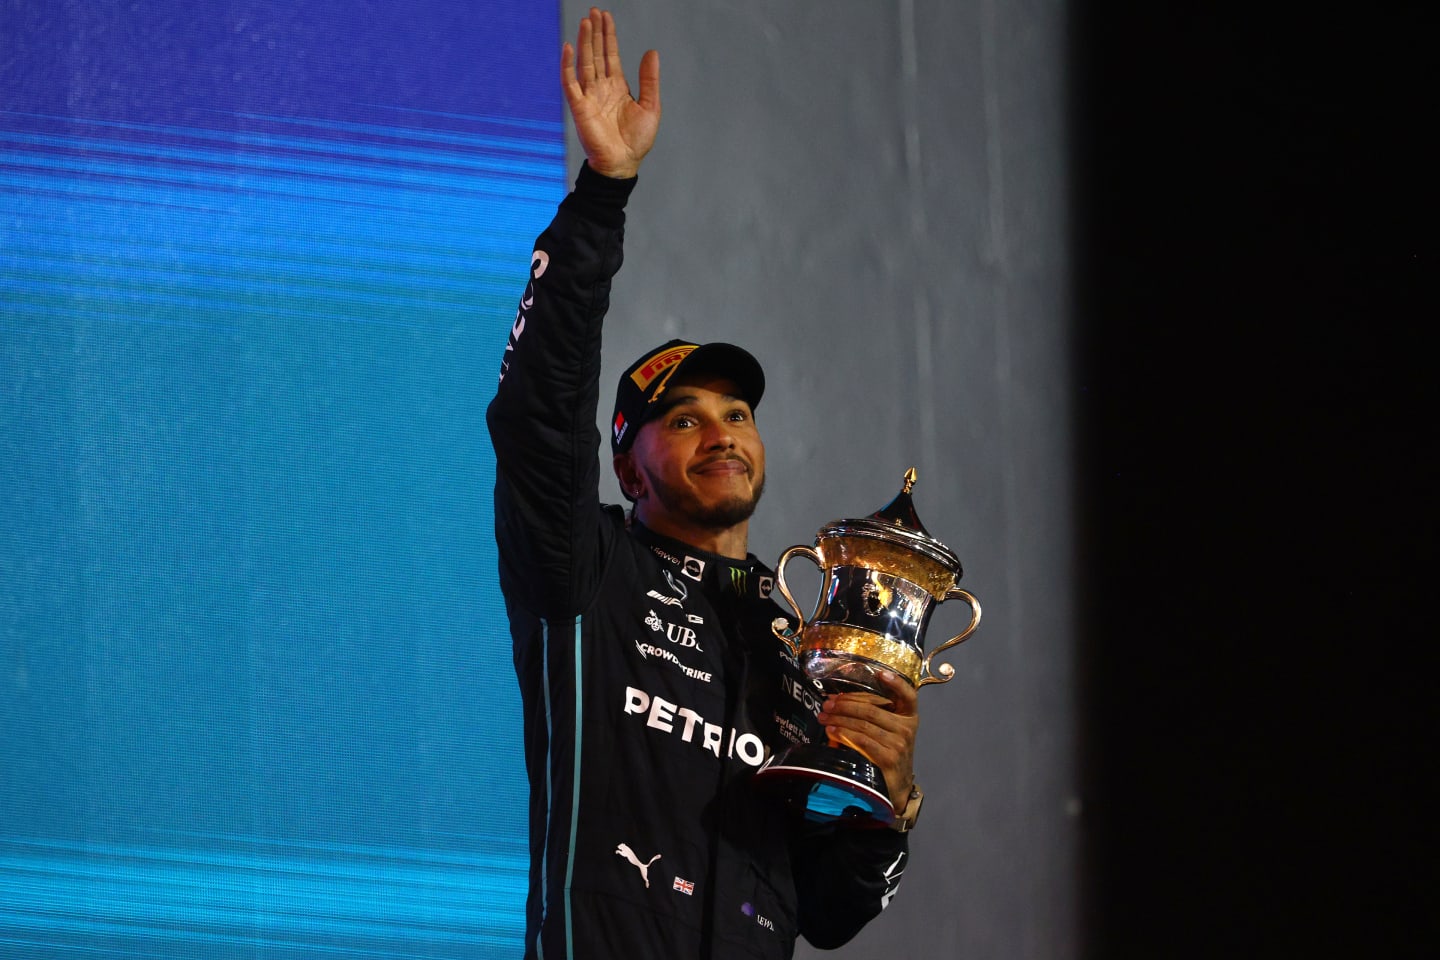 BAHRAIN, BAHRAIN - MARCH 20: Third placed Lewis Hamilton of Great Britain and Mercedes celebrates on the podium during the F1 Grand Prix of Bahrain at Bahrain International Circuit on March 20, 2022 in Bahrain, Bahrain. (Photo by Clive Rose - Formula 1/Formula 1 via Getty Images)